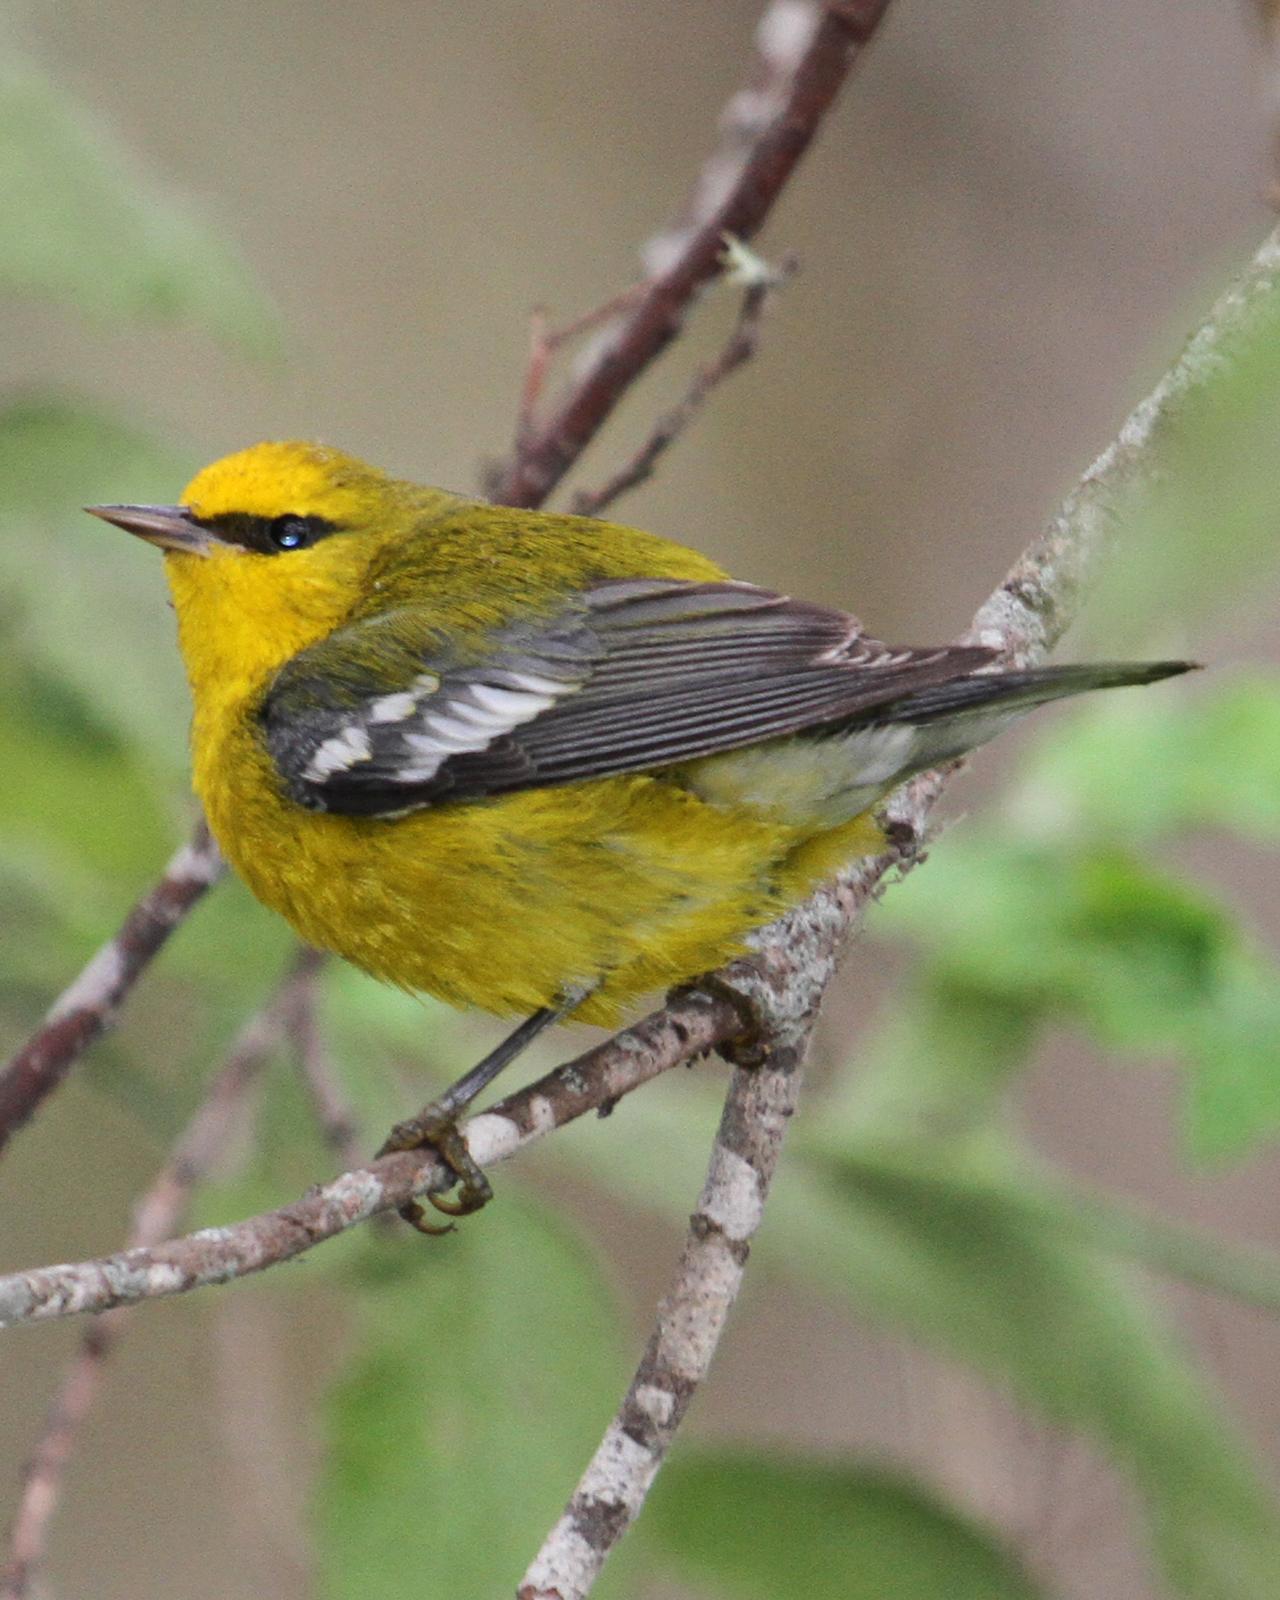 Blue-winged Warbler Photo by Jamie Chavez